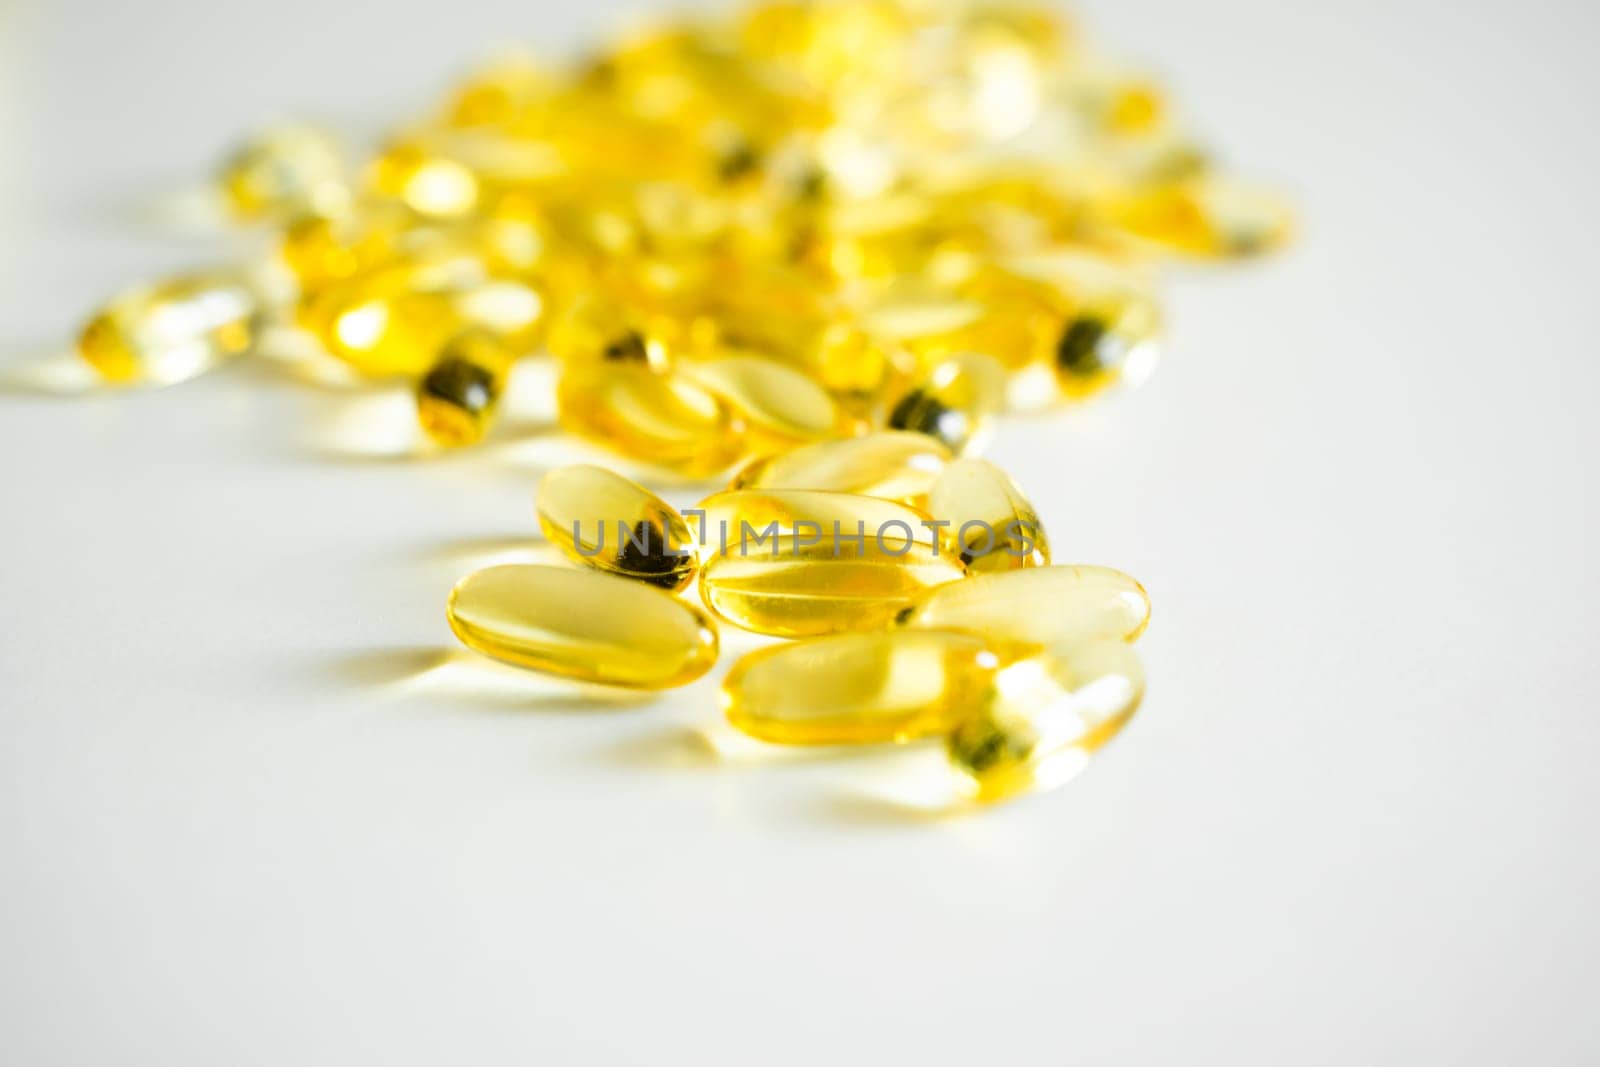 Capsules of Omega 3 on white background. Health care concept. Medical pill or vitamin's capsule pattern. Medicine, healthcare or pharmacy concept